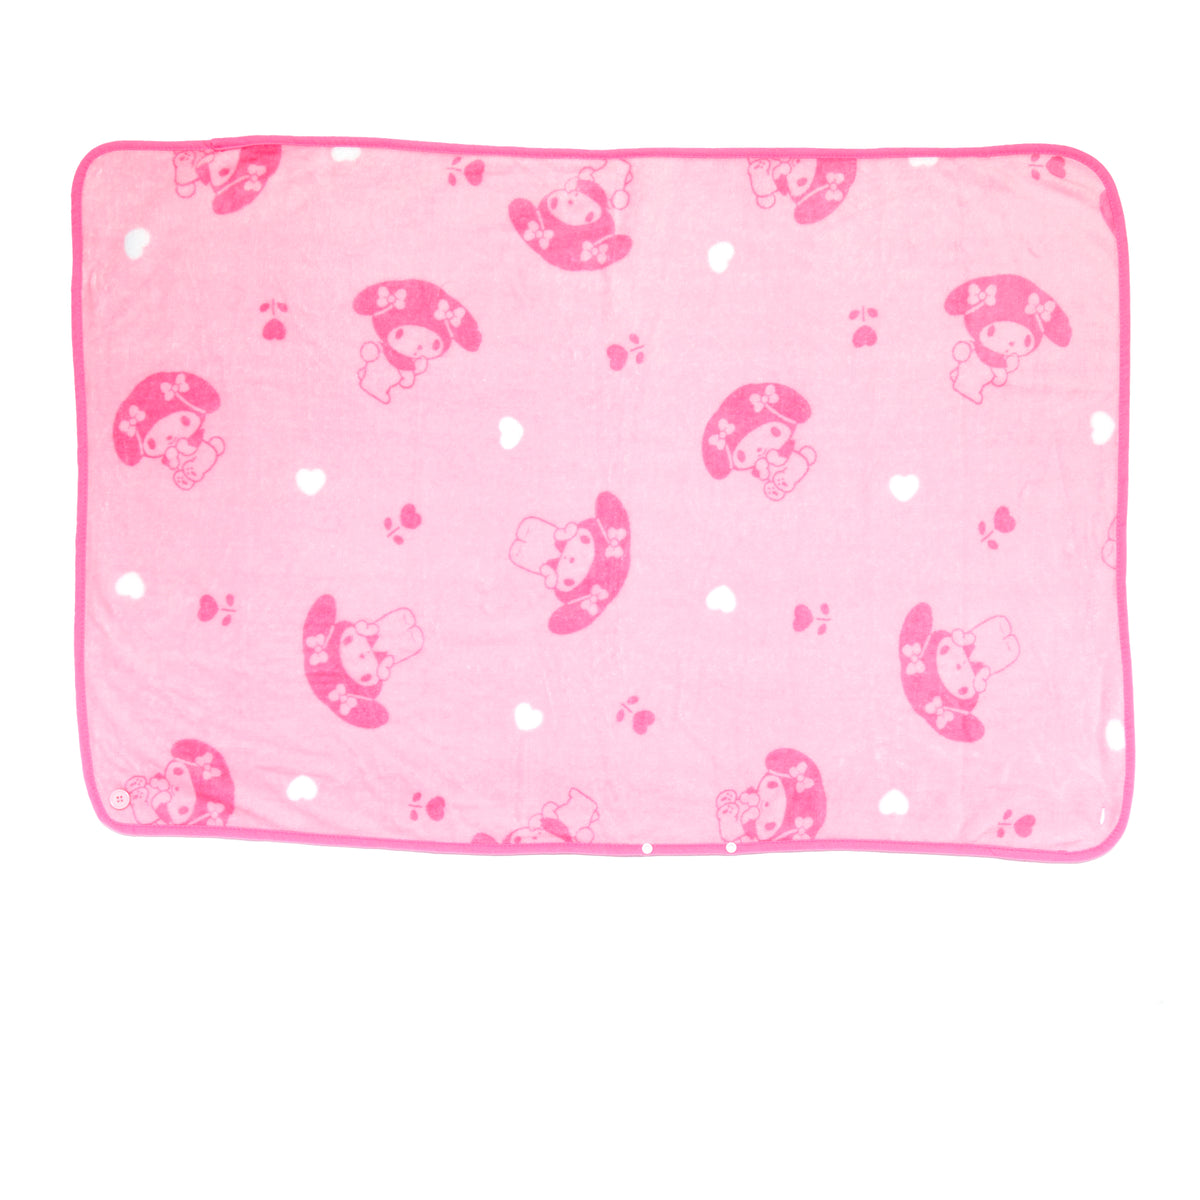 My Melody 3-in-1 Blanket Case Home Goods Japan Original   